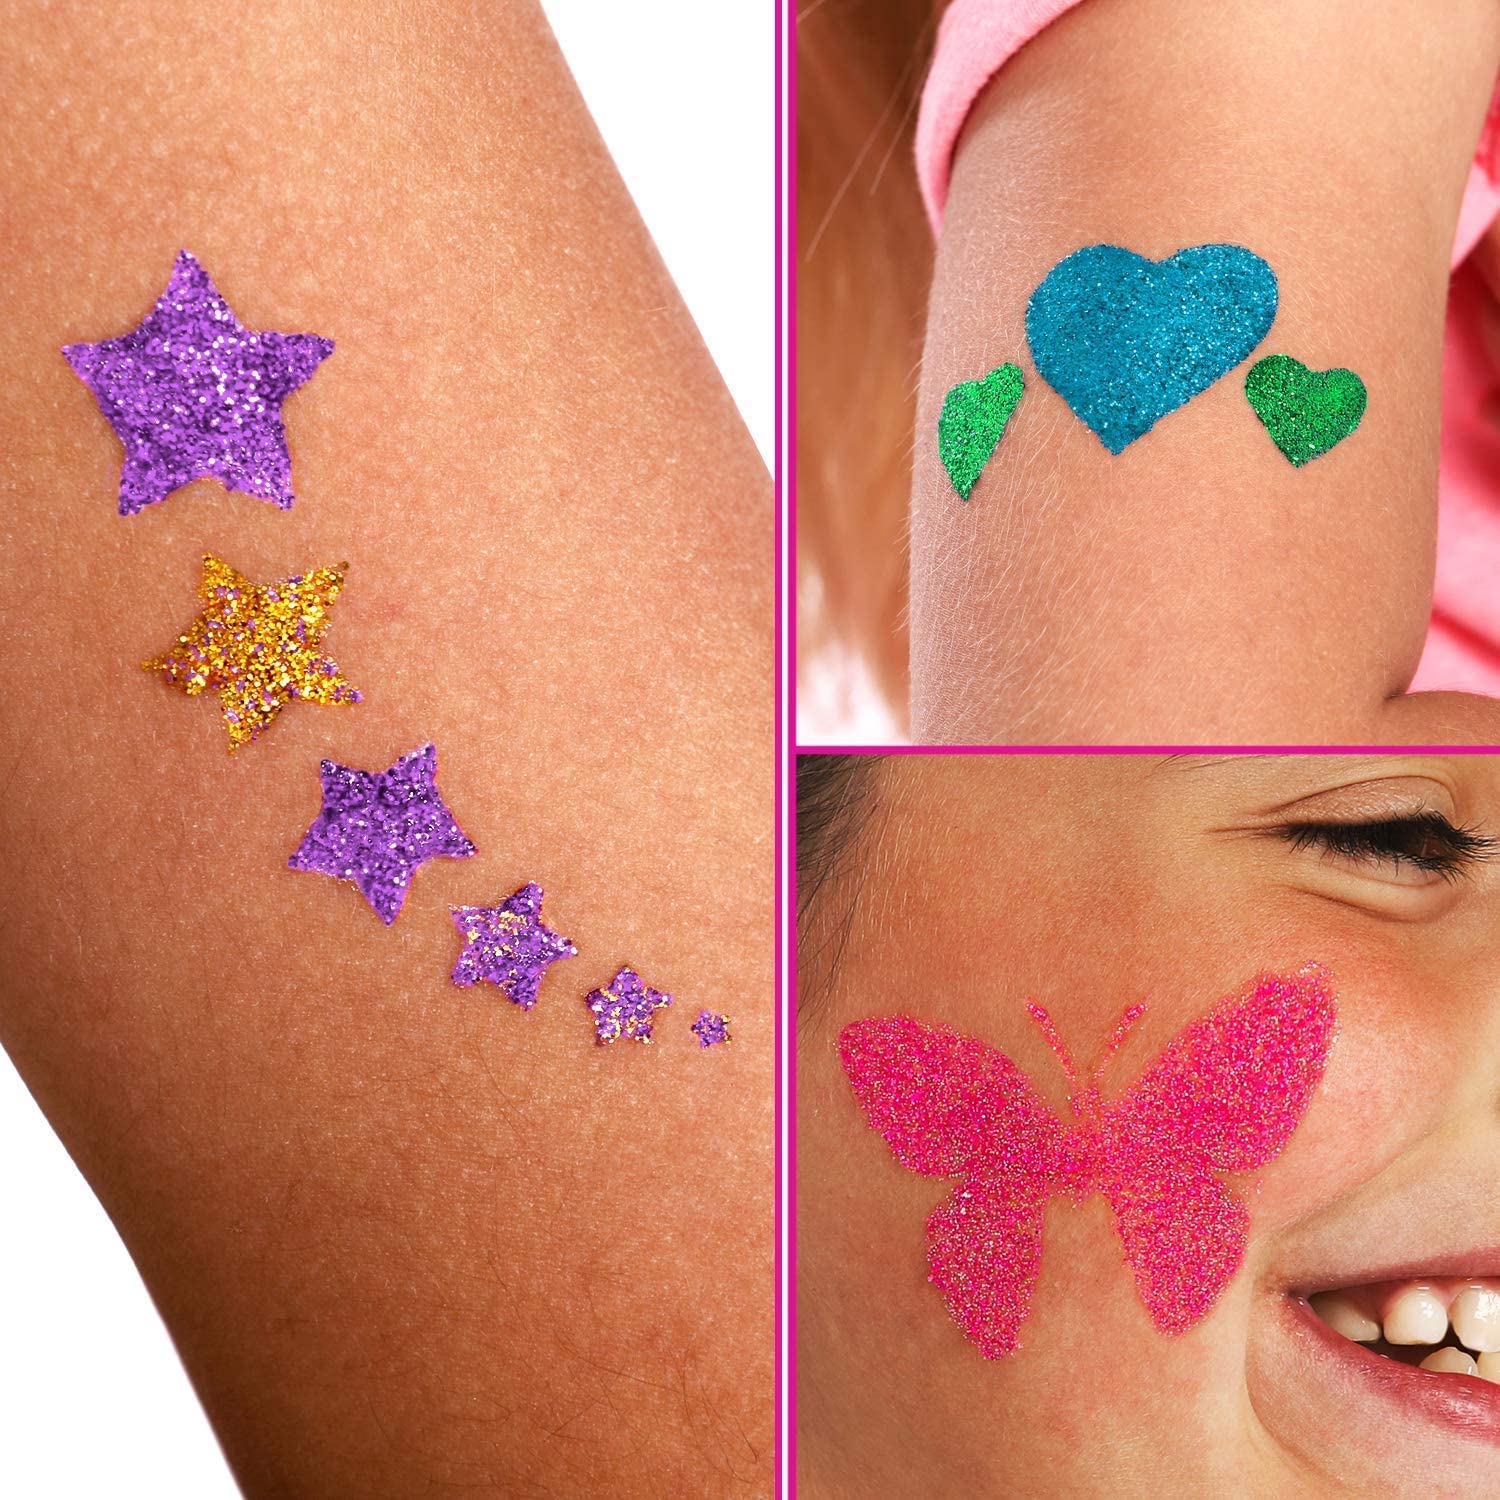 GirlZone Temporary Glitter Tattoos Kit for Girls, 33-Piece Colorful Tattoo Set for Creative Kids, Awesome Girls Toy for Sleepovers & Fun Gift Idea